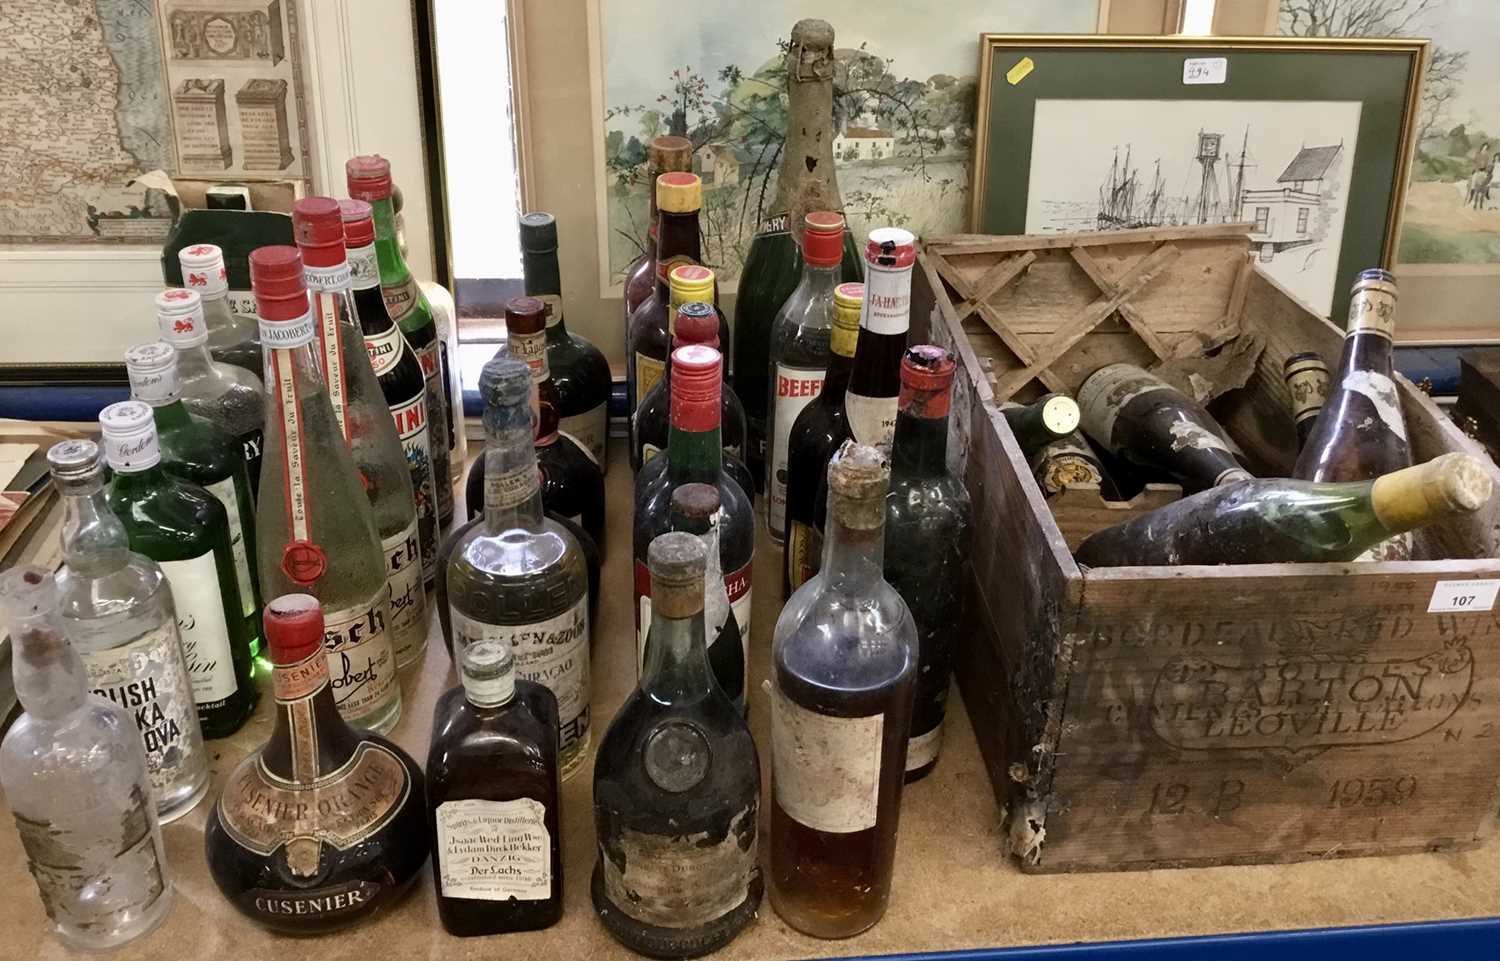 Lot 107 - Forty bottles of vintage spirits, wines and liquors to include gin, polish vodka, kirsch etc, some bottles empty for display purposes